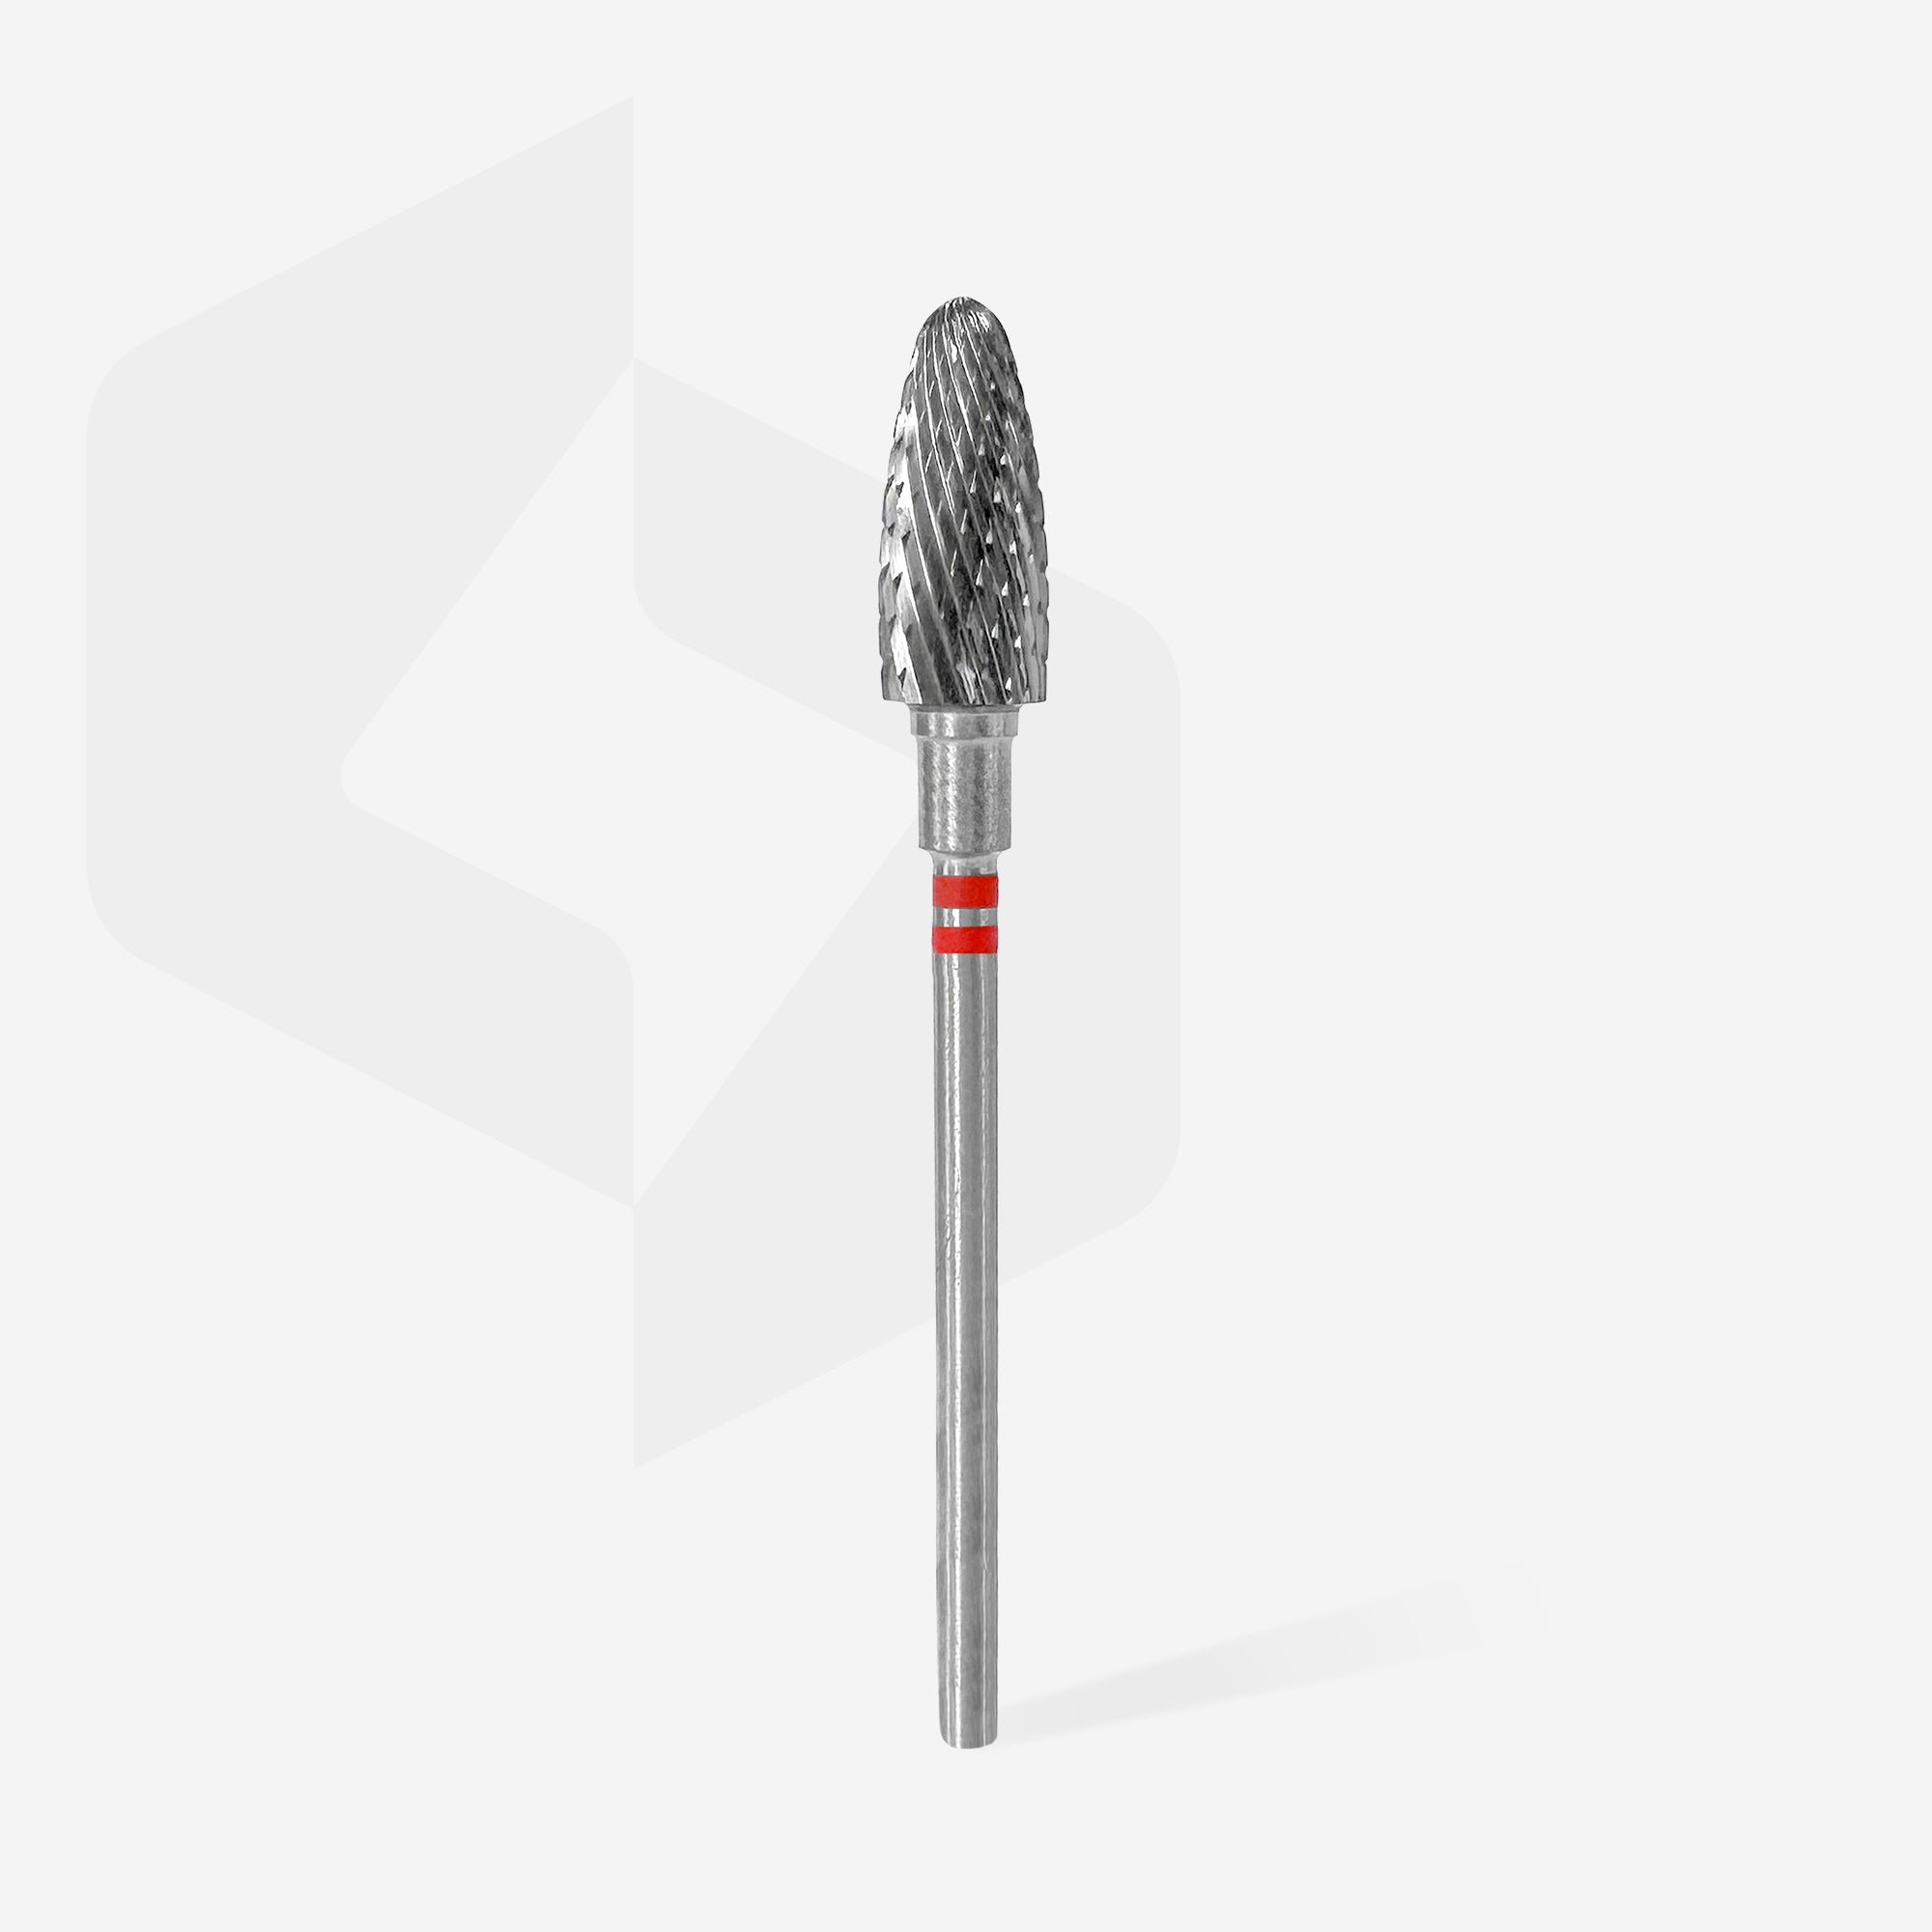 Carbide nail drill bit for left-handed users corn red EXPERT head diameter 6 mm / working part 14 mm